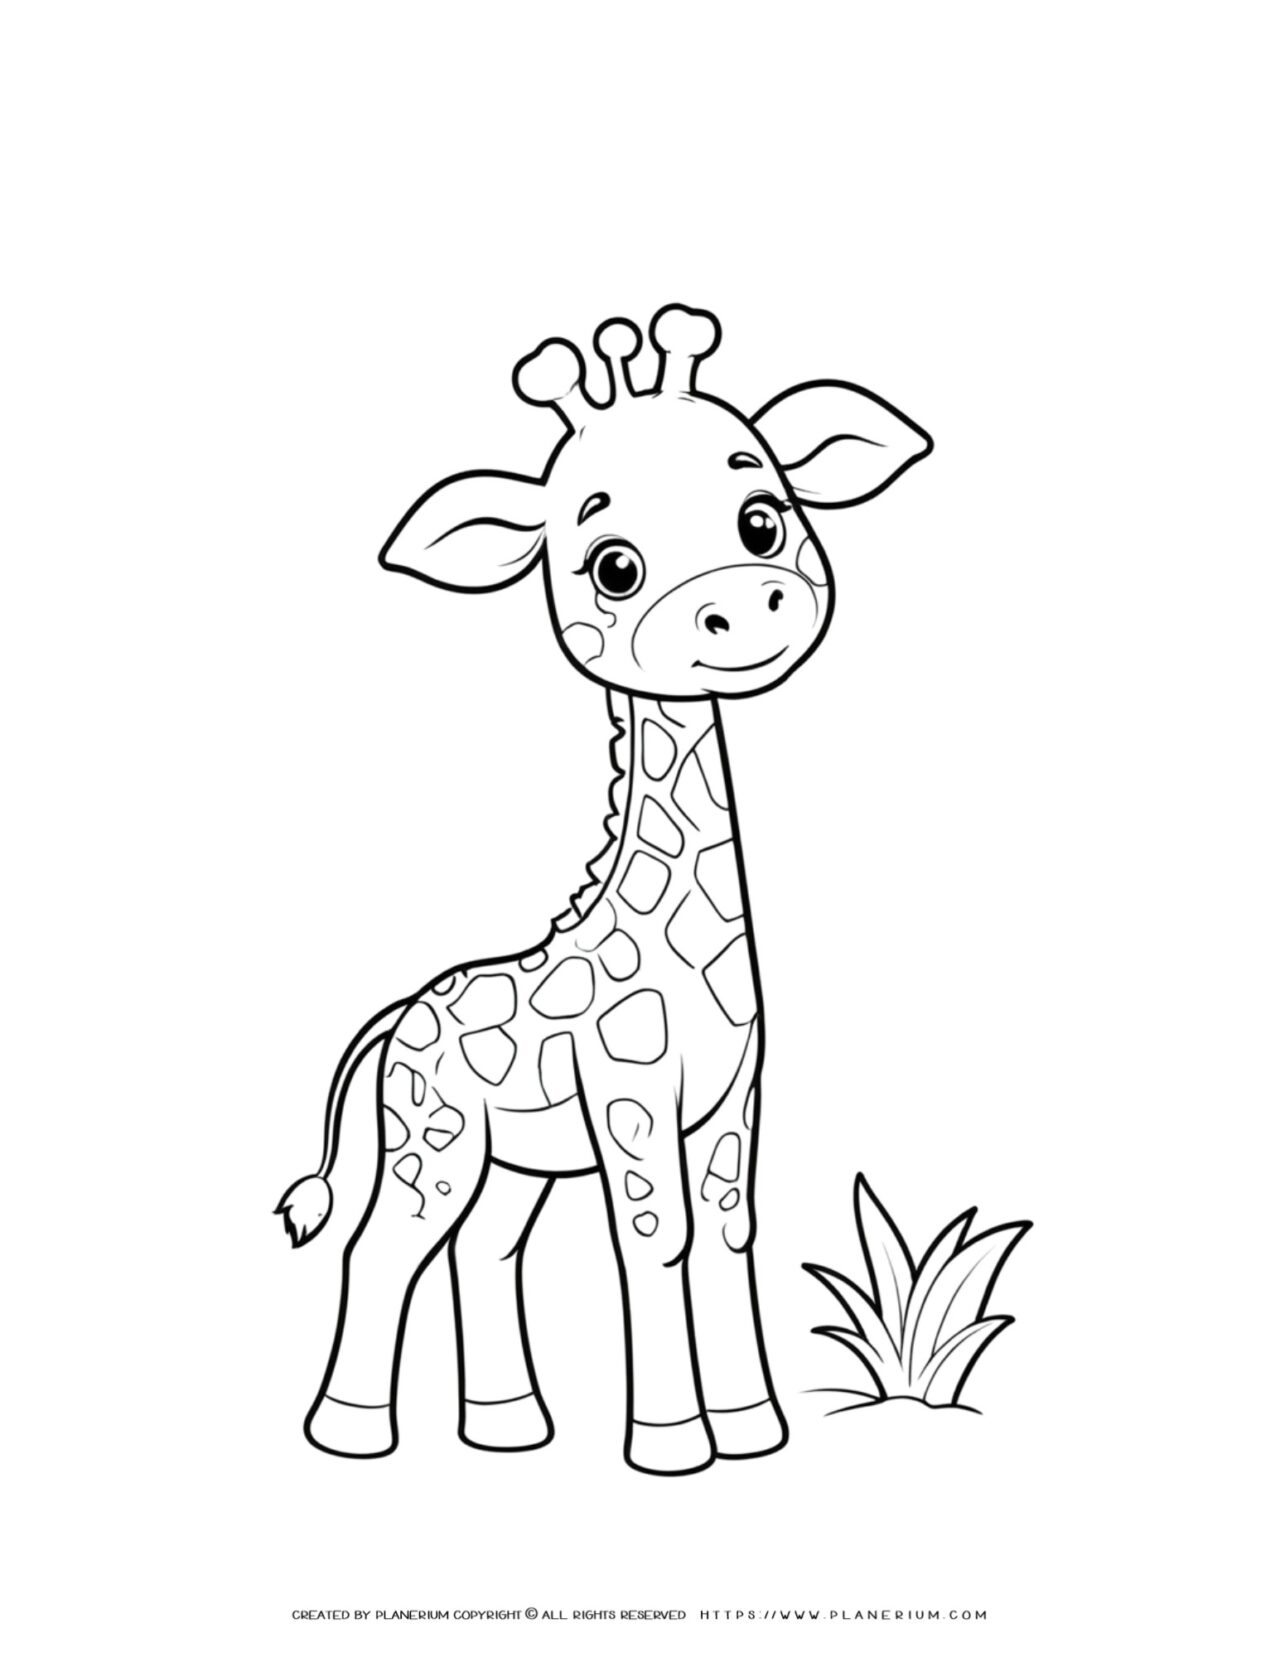 cute-giraffe-comic-style-coloring-page-for-kids